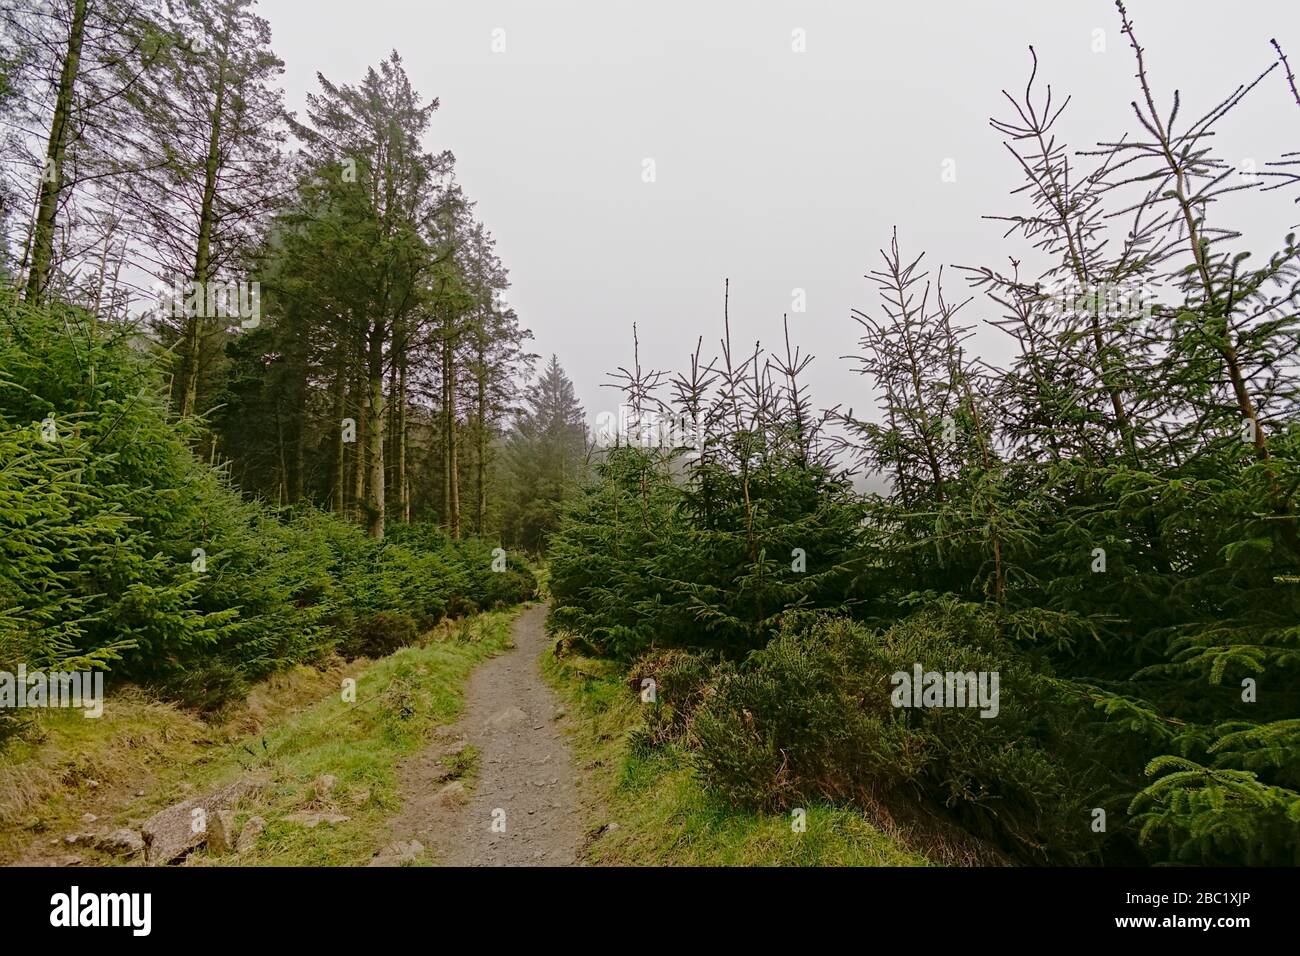 Hiking trail through a coniferous forest and gorse shrubs in foggy Ticknock mountains, Dublin, Ireland Stock Photo